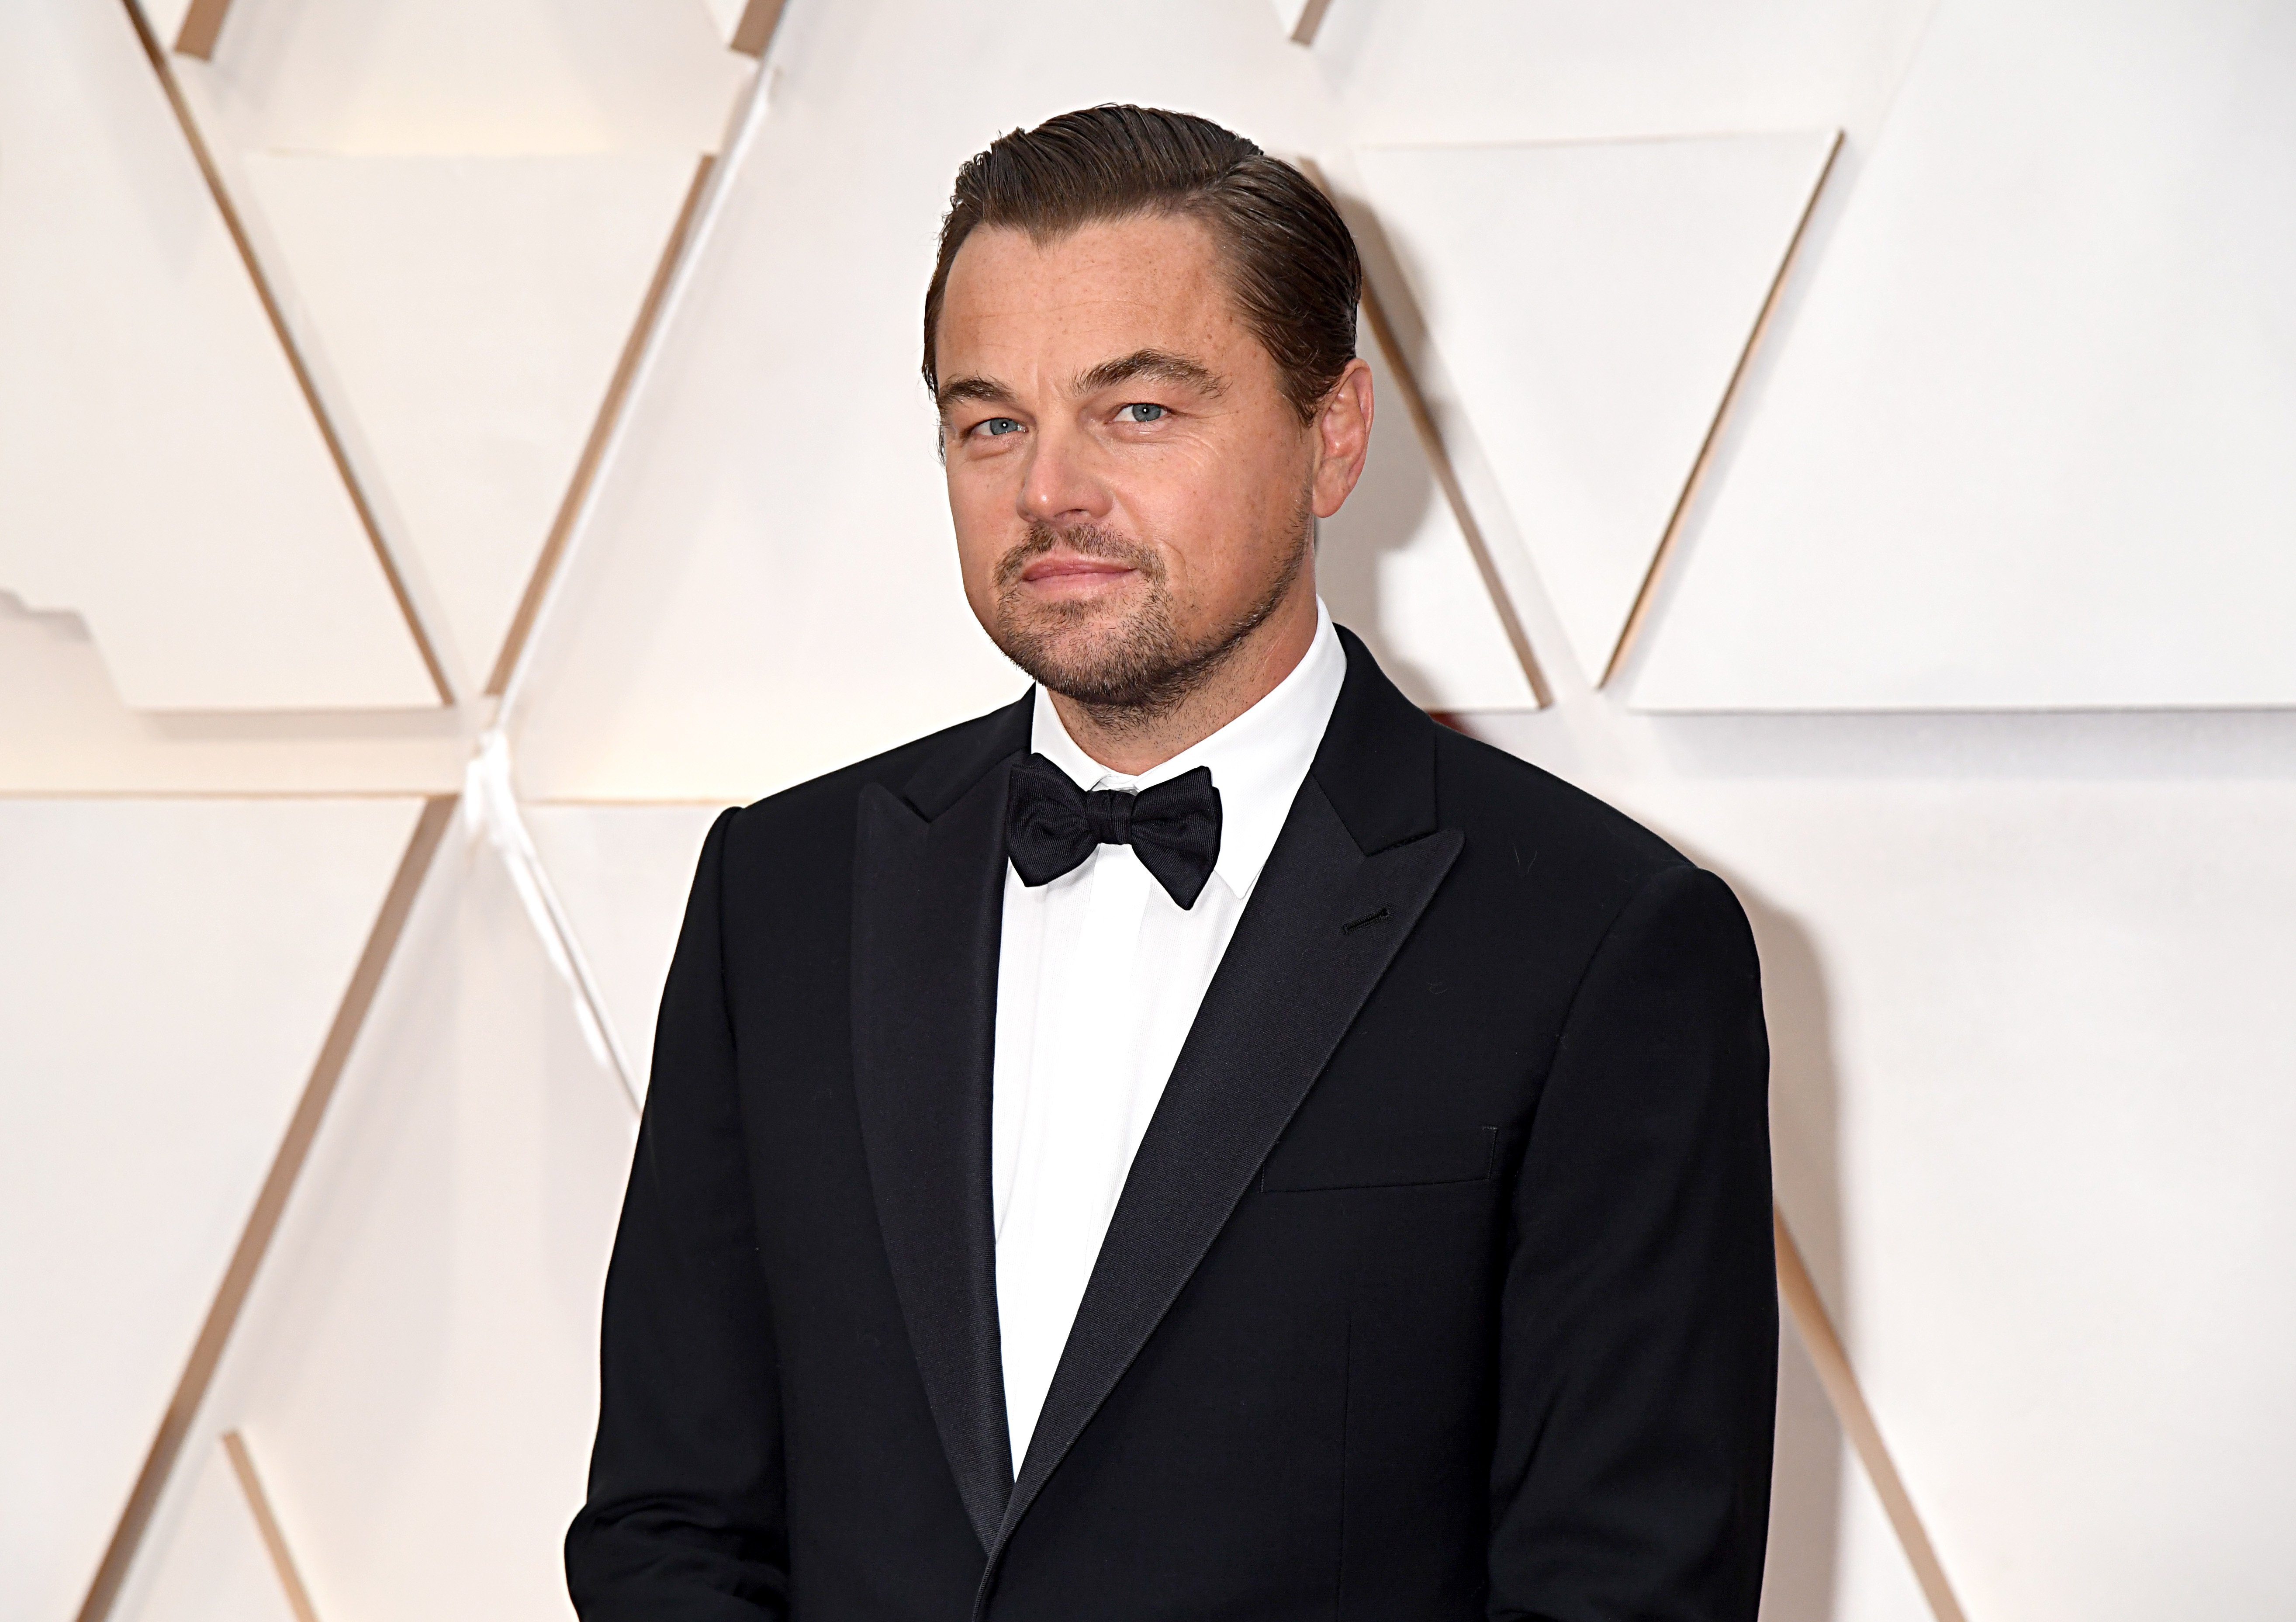 Leonardo DiCaprio attends the 92nd Annual Academy Awards in Hollywood, California on February 9, 2020 | Photo: Getty Images